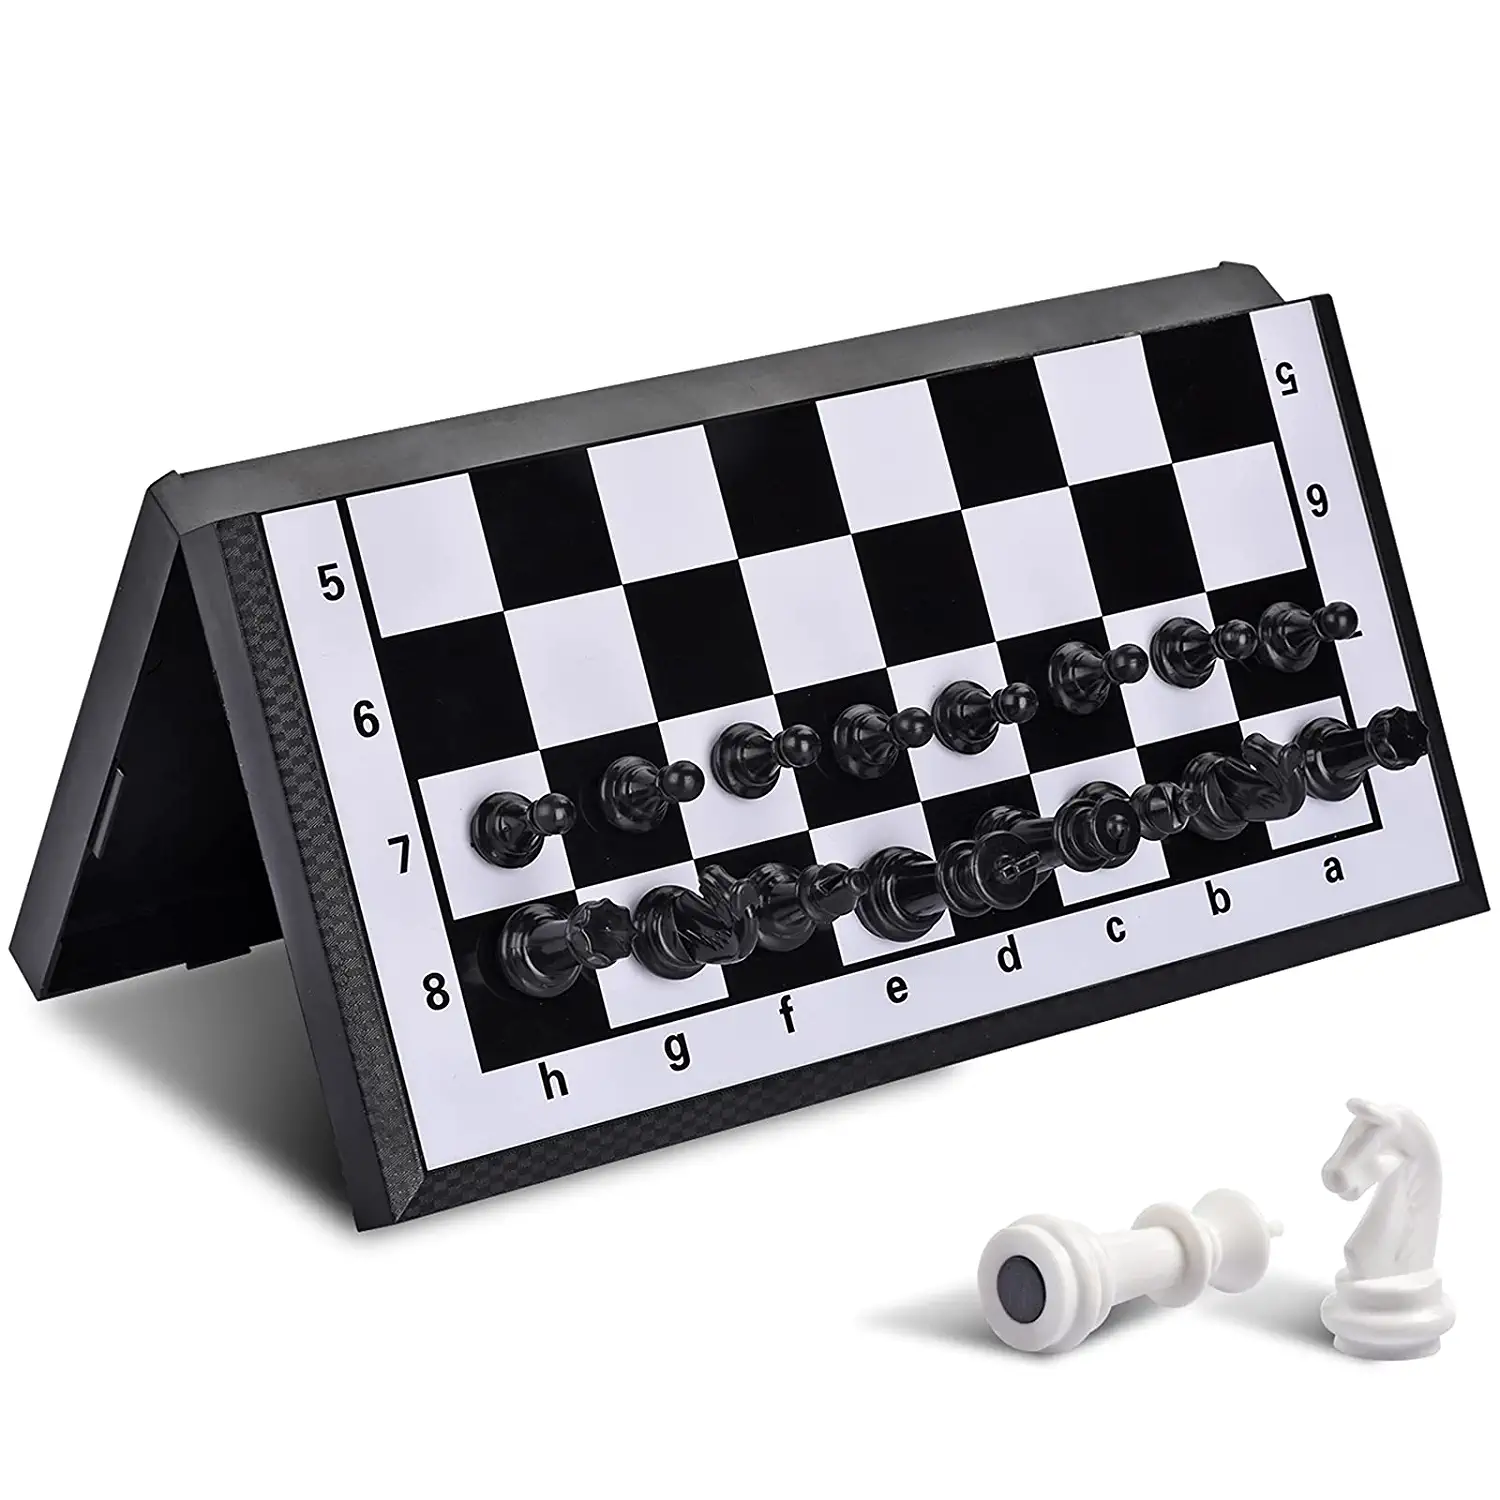 Pirates of the Caribbean: At World's End Chess set - Collector's Edition